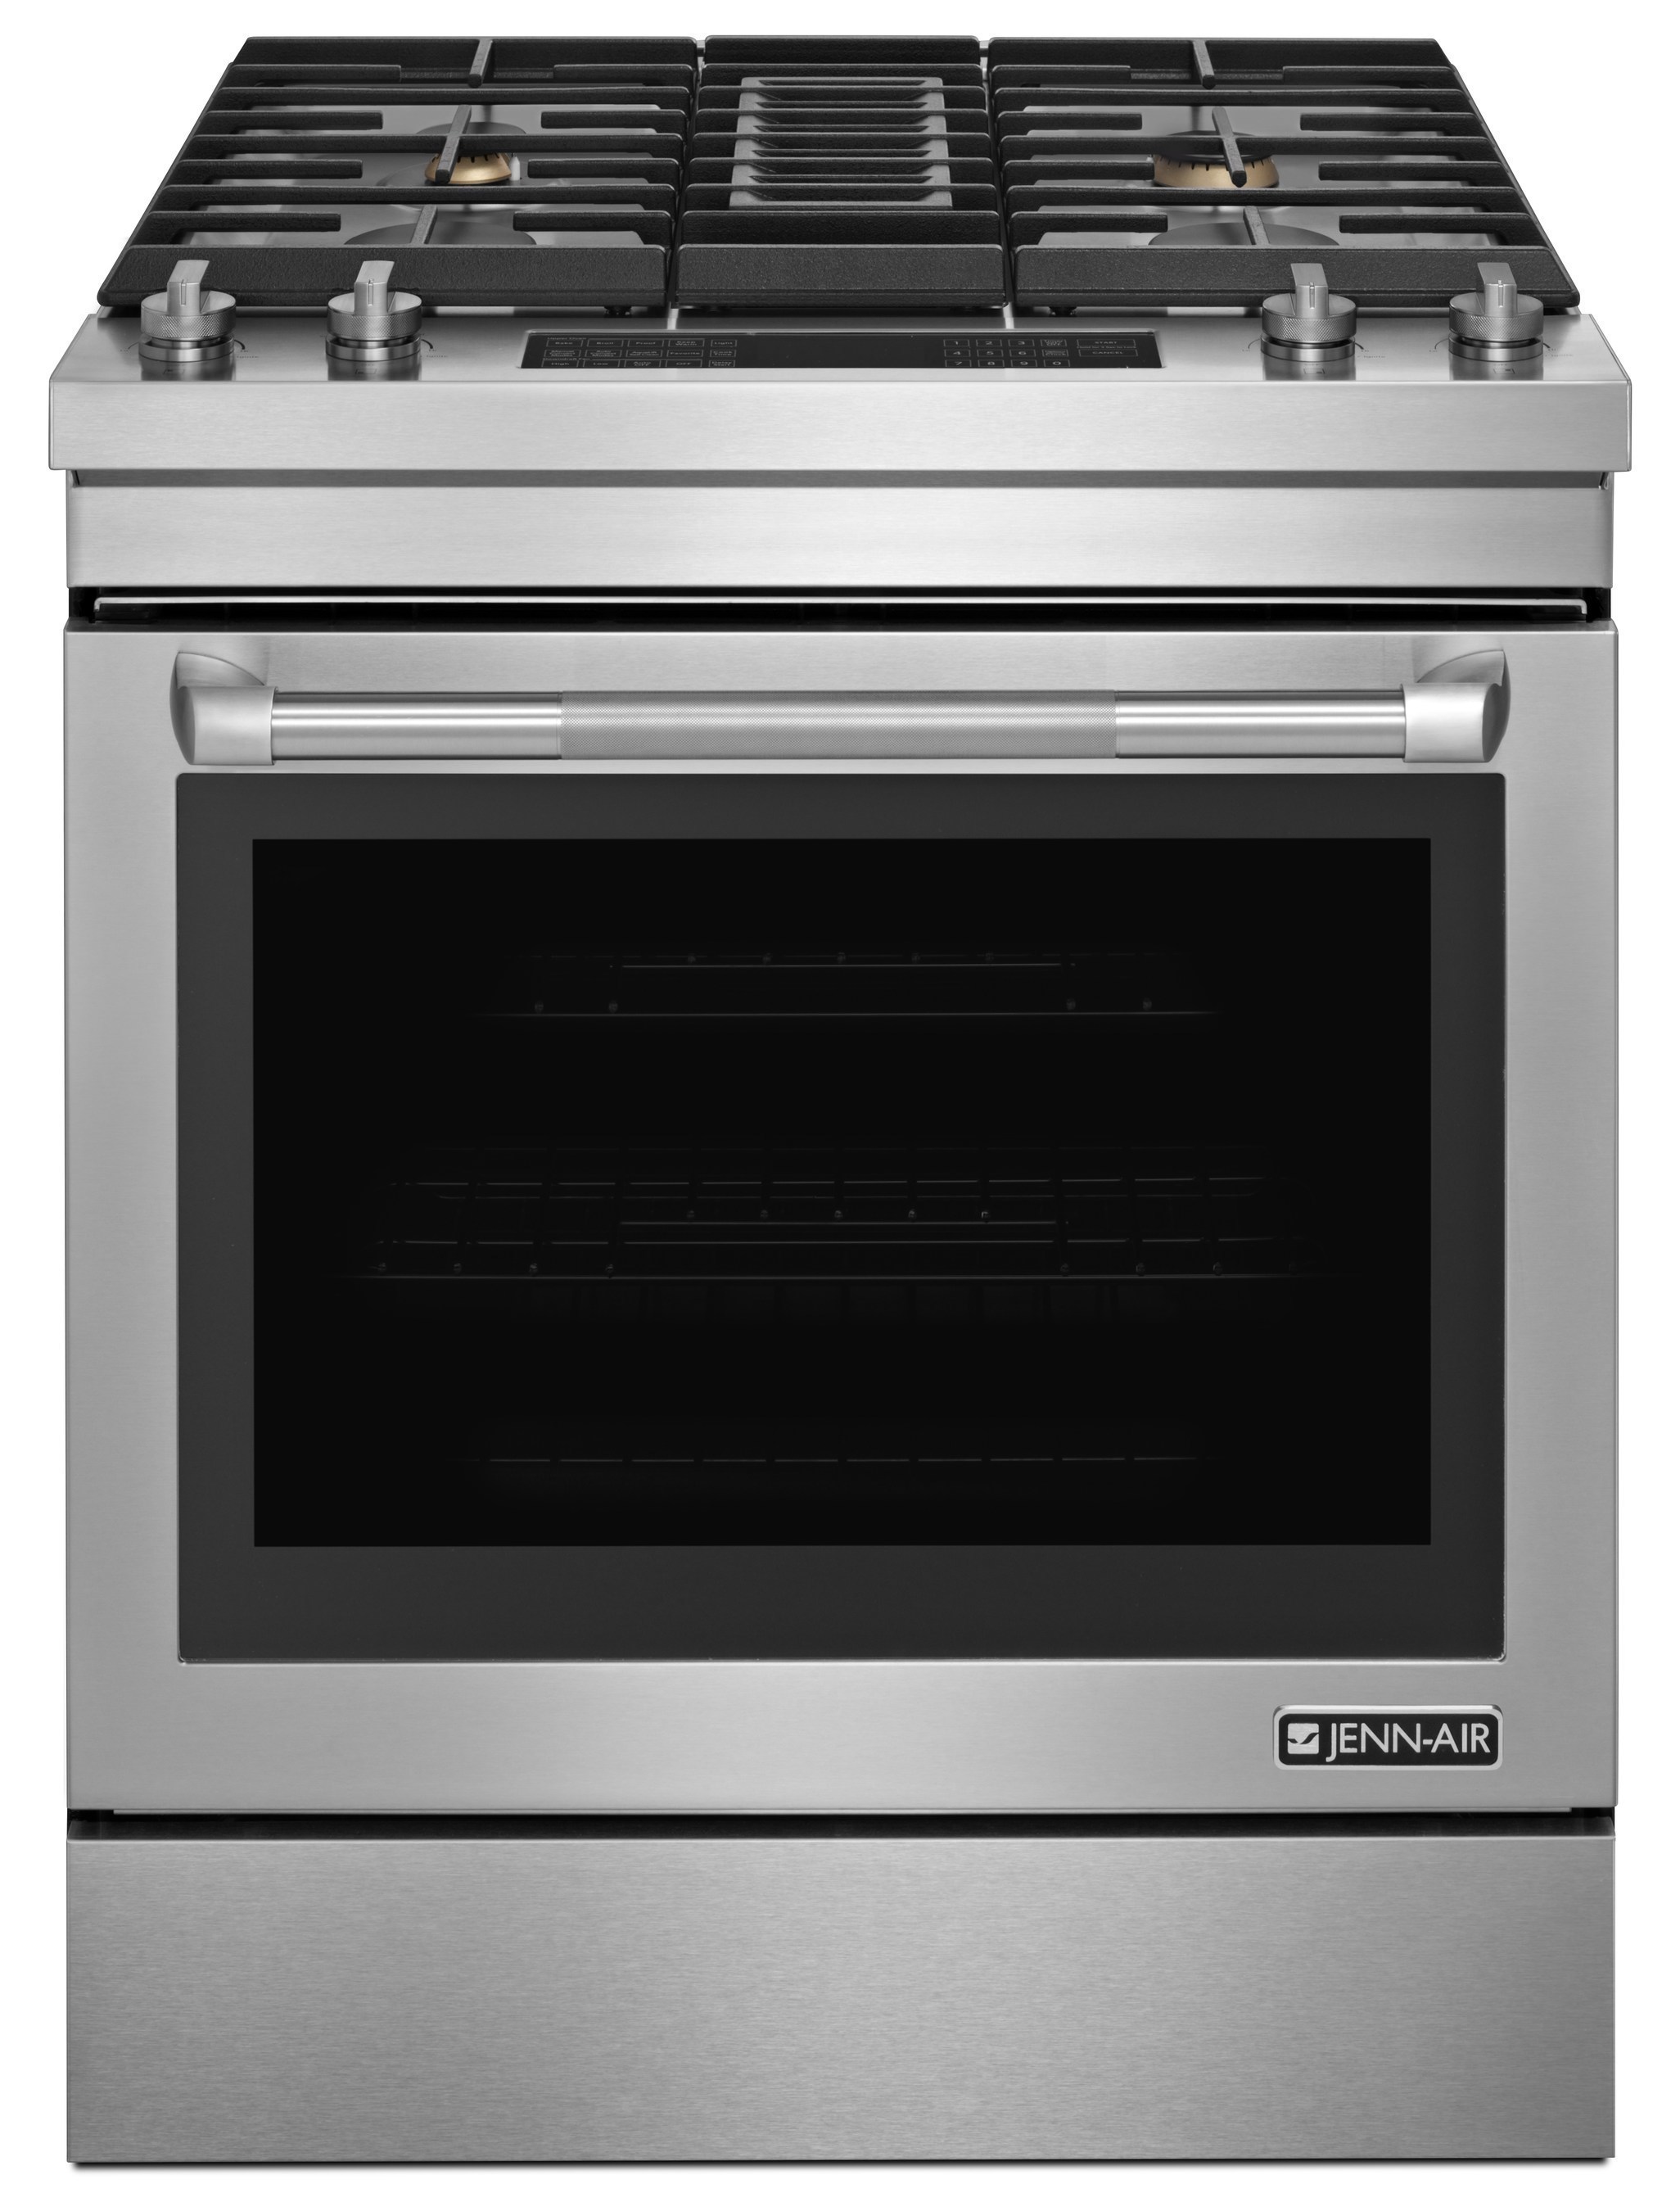 Jenn-Air is introducing a 30-inch range with downdraft ventilation that also features its first-ever option for duct-free range installation.